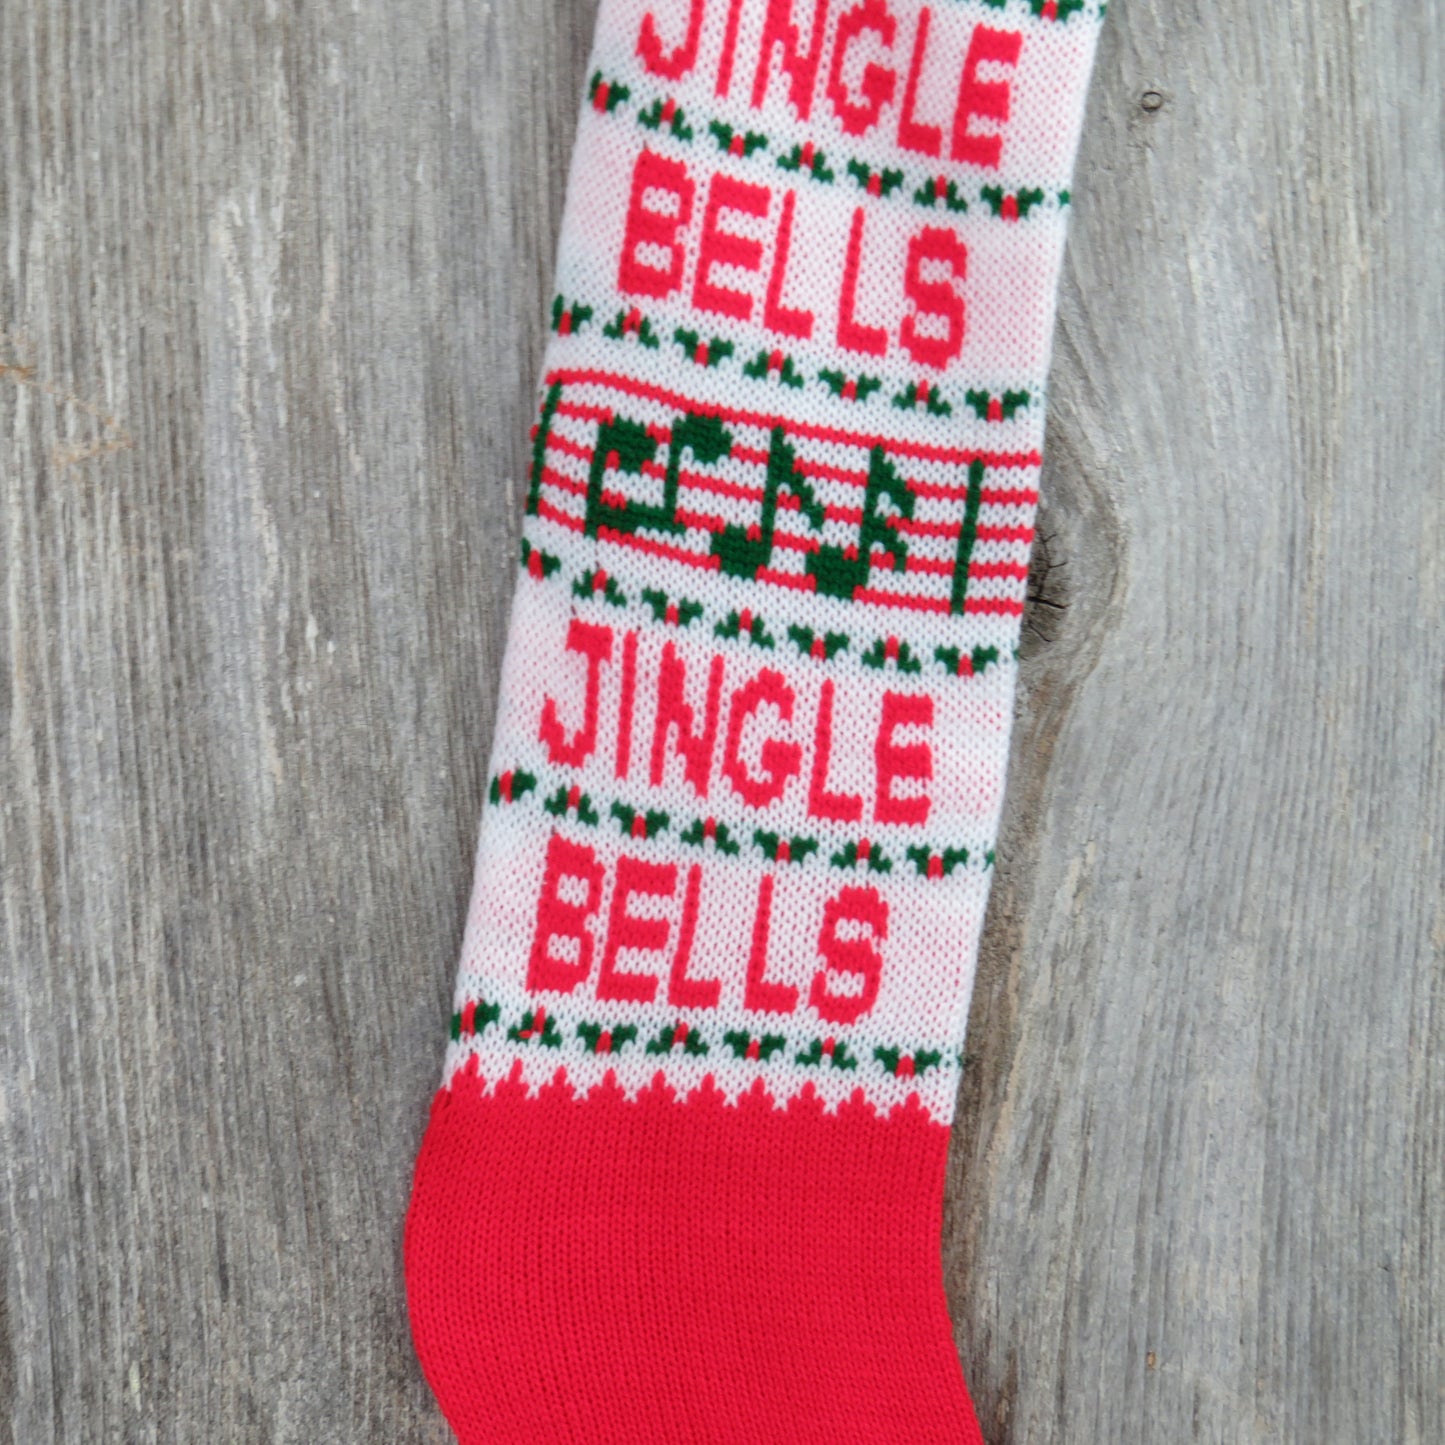 Vintage Jingle Bells Knit Stocking Christmas Music Notes Red Green White Pom Pom - At Grandma's Table